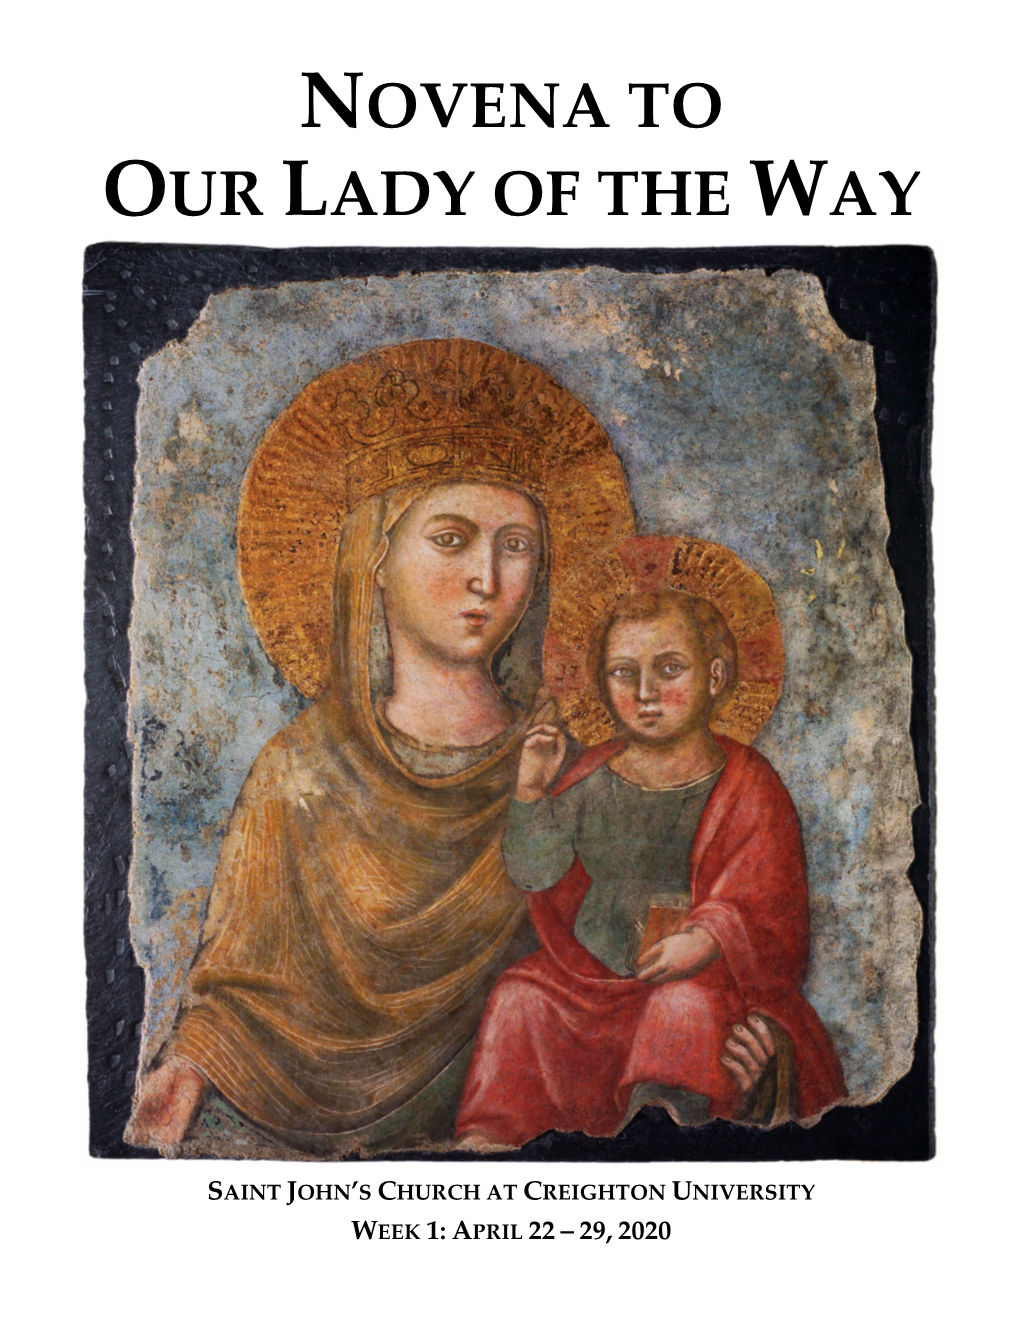 Novena to Our Lady of the Way